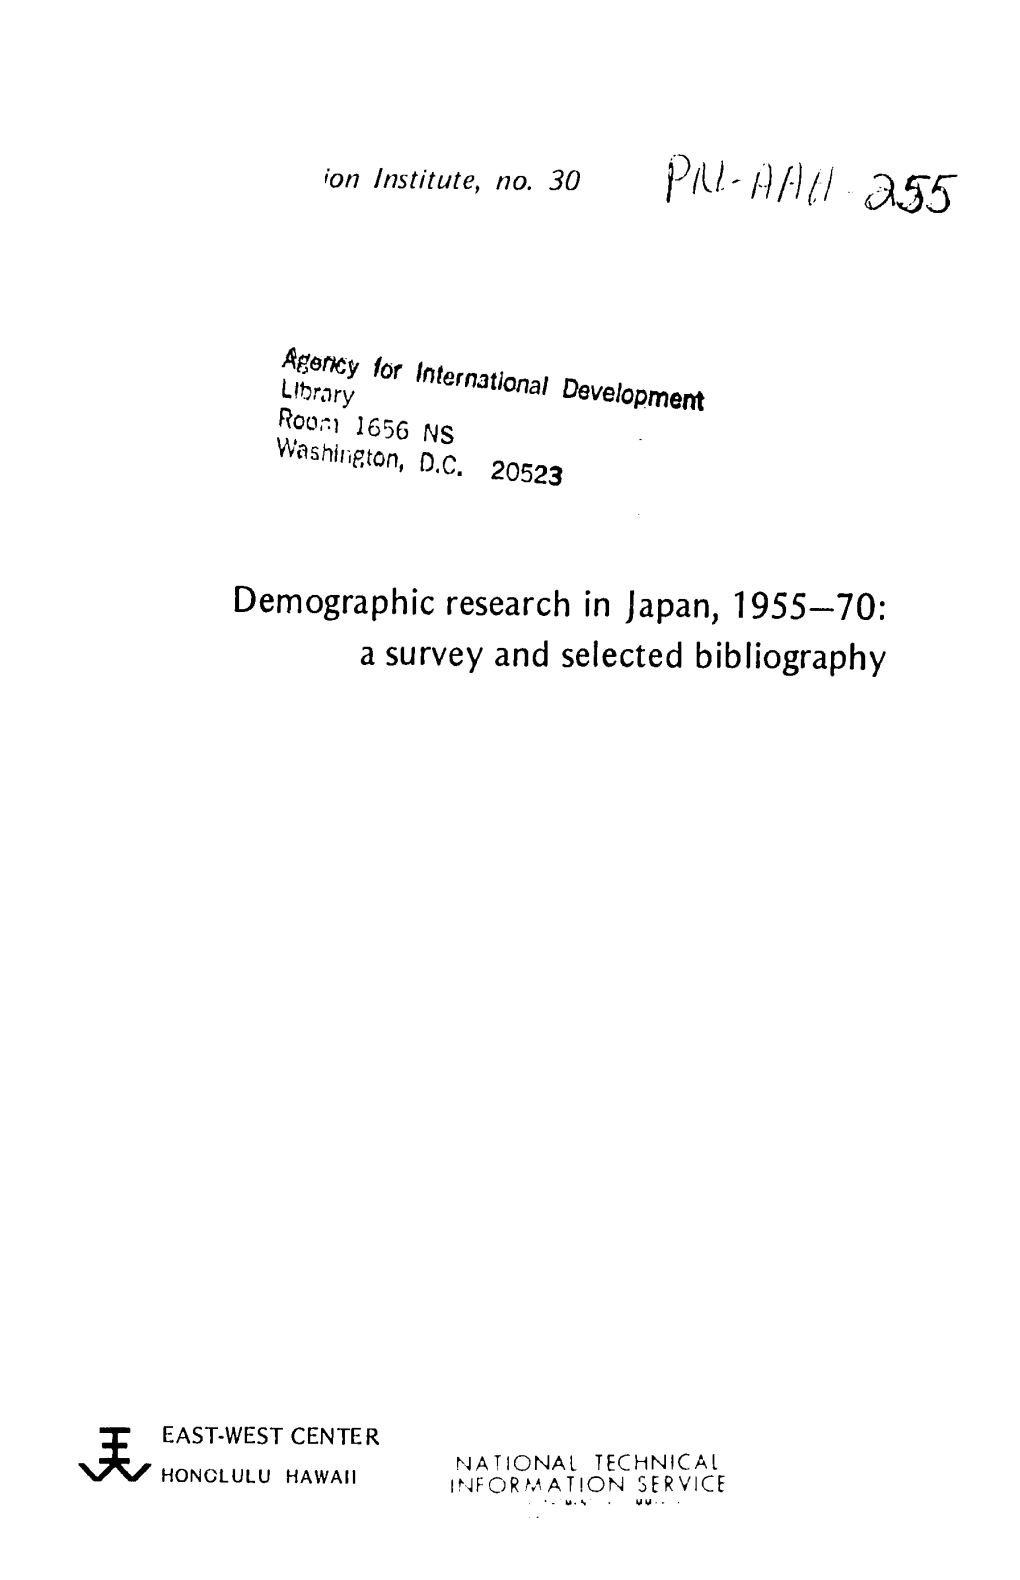 Demographic Research in Japan, 1955-70: a Survey and Selected Bibliography